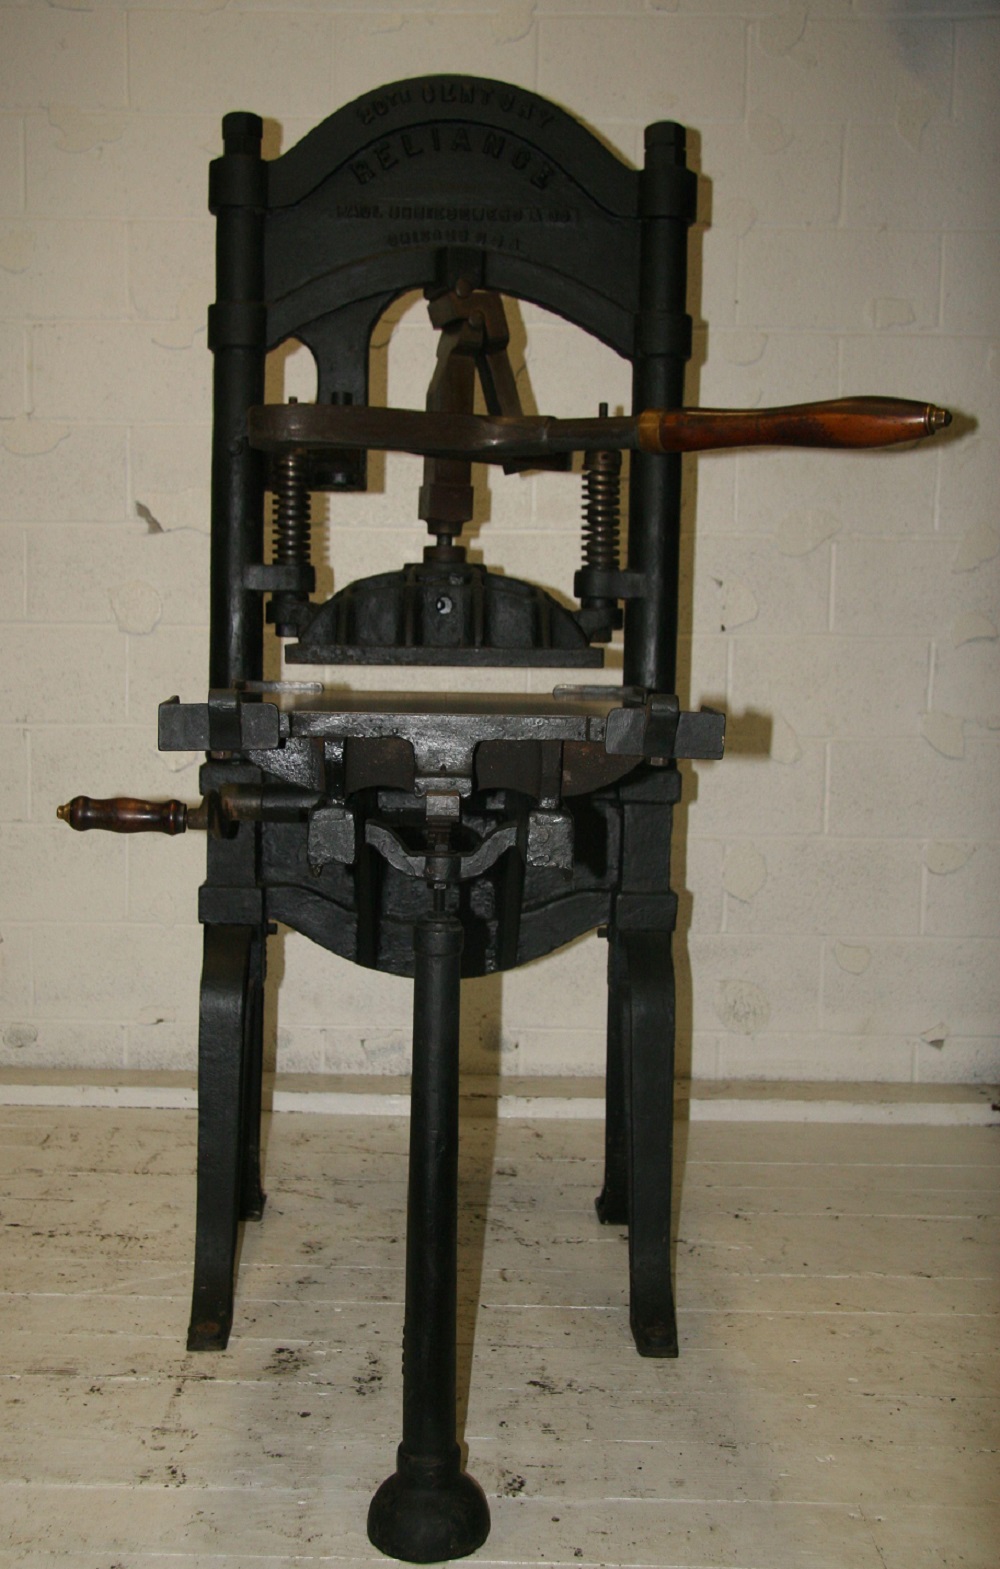 The Wooden Common Press